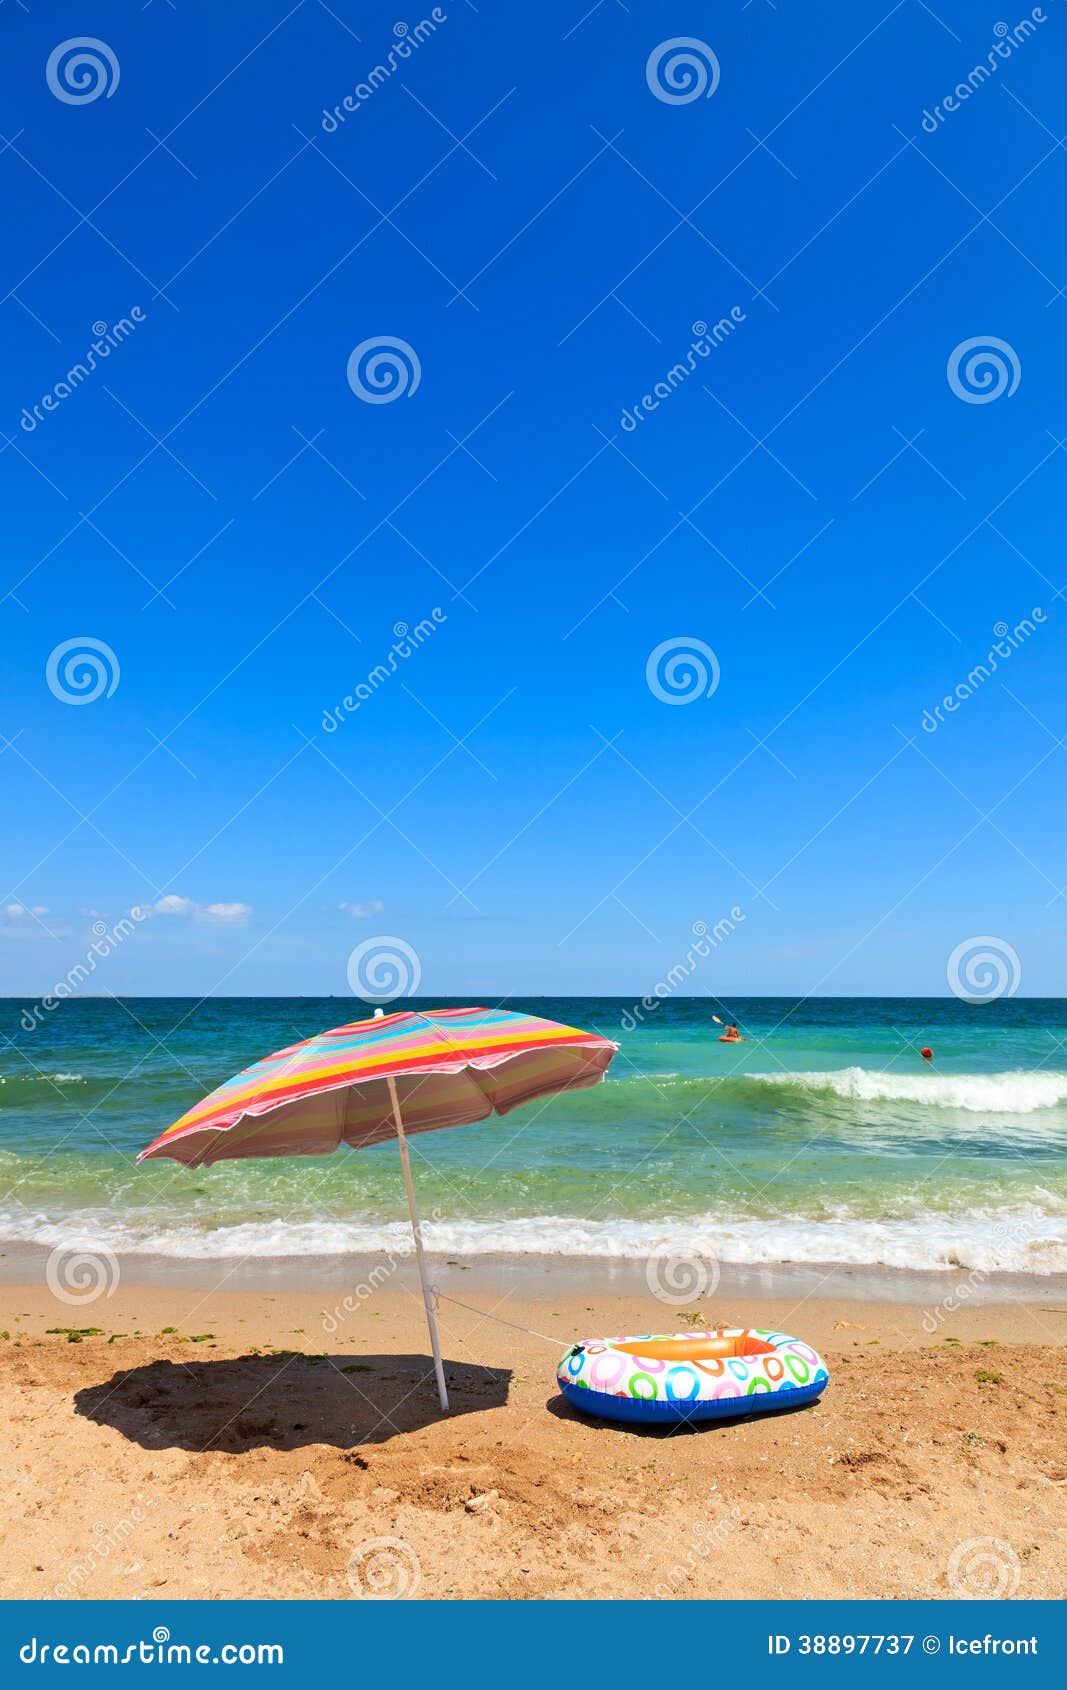 Beach Umbrella and Toy Boat at Sea Stock Image - Image of summer, wave ...